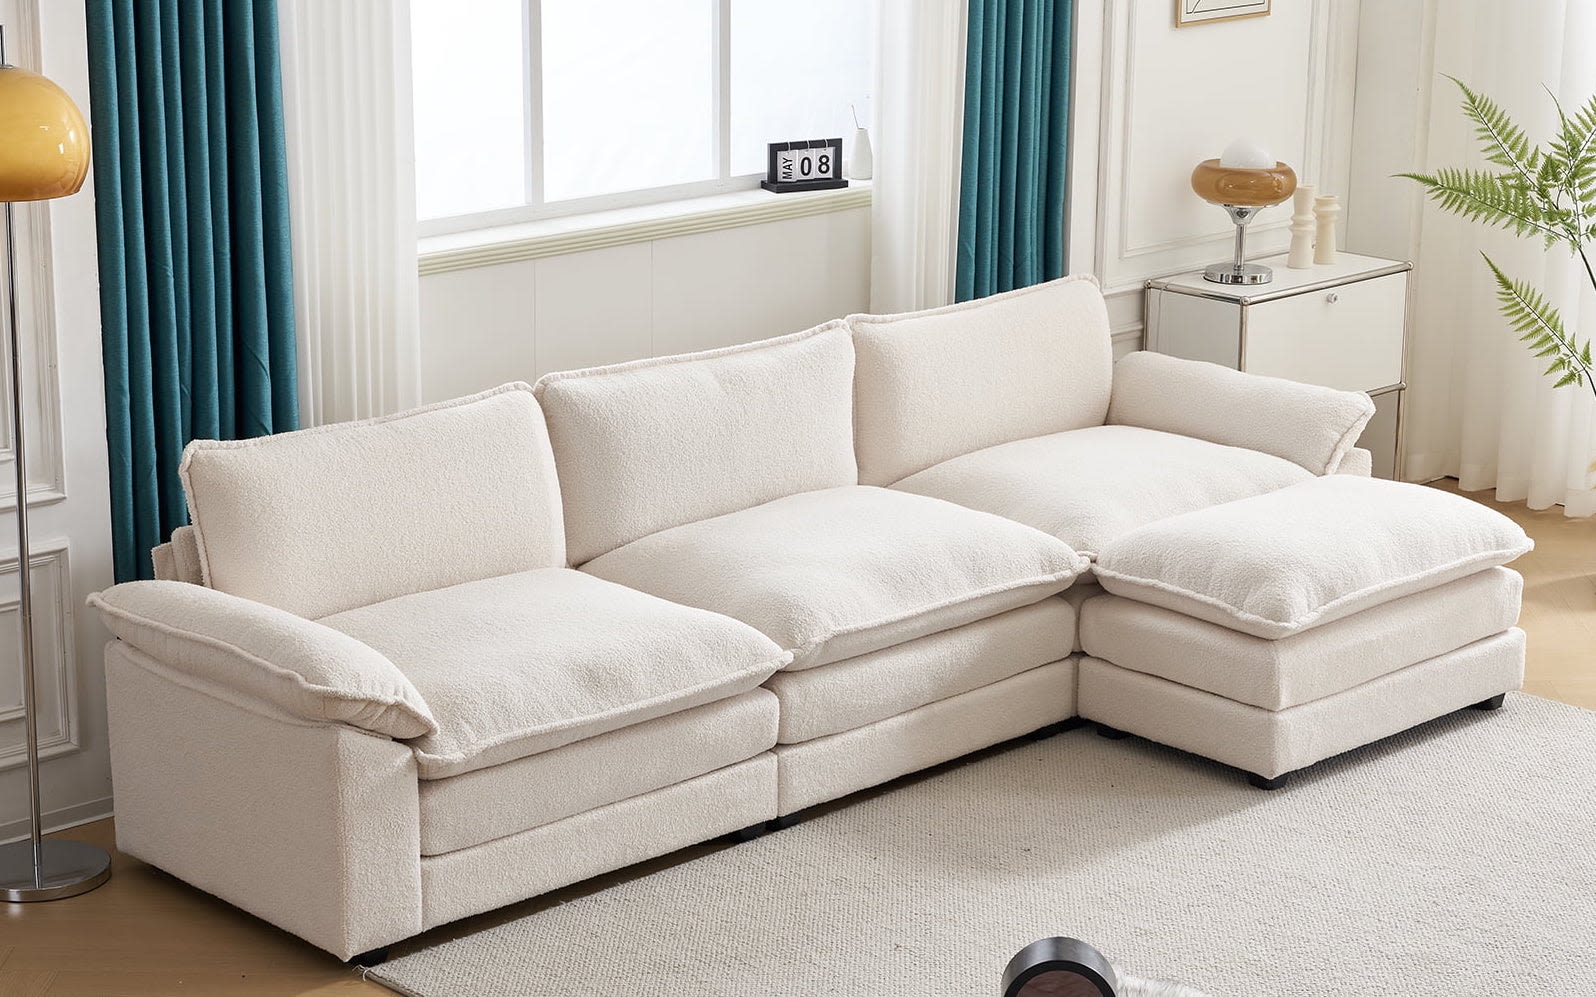 We Found a Cloud Couch Dupe at Walmart & It's on Sale for Under $500